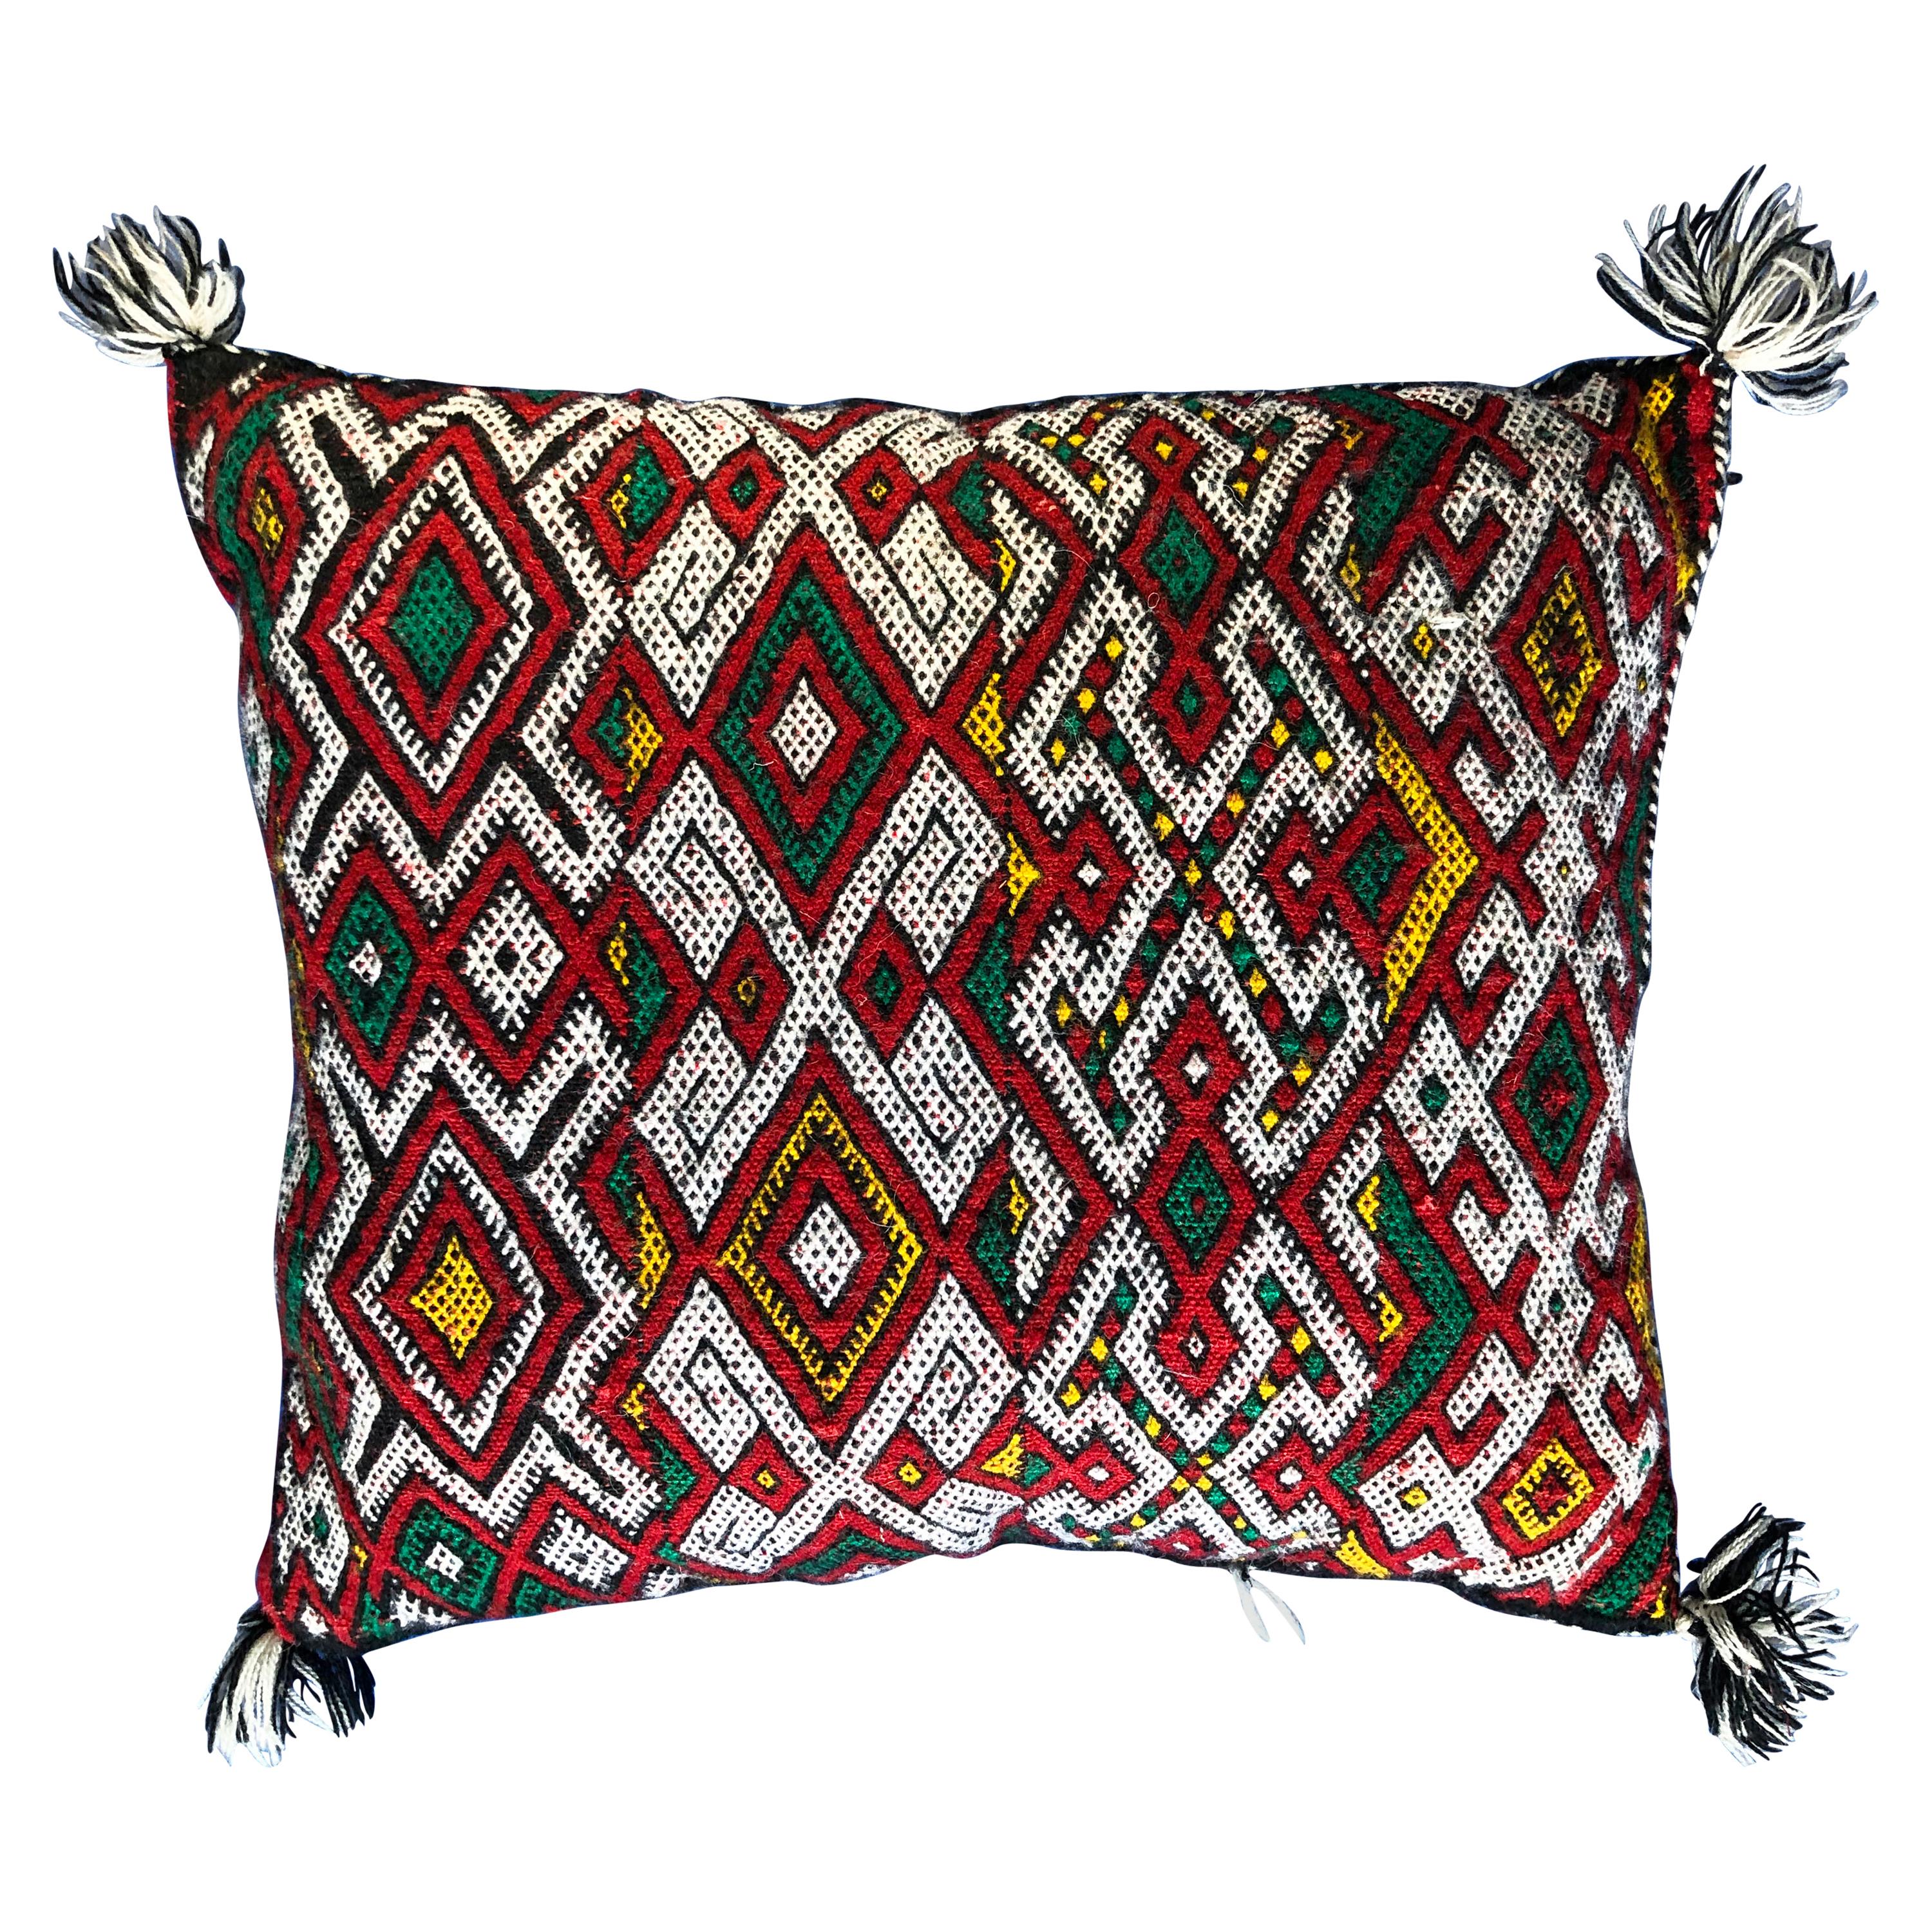 Bold Red Vintage Moroccan Wool Kilim Throw Pillow Handwoven Boho Chic For Sale